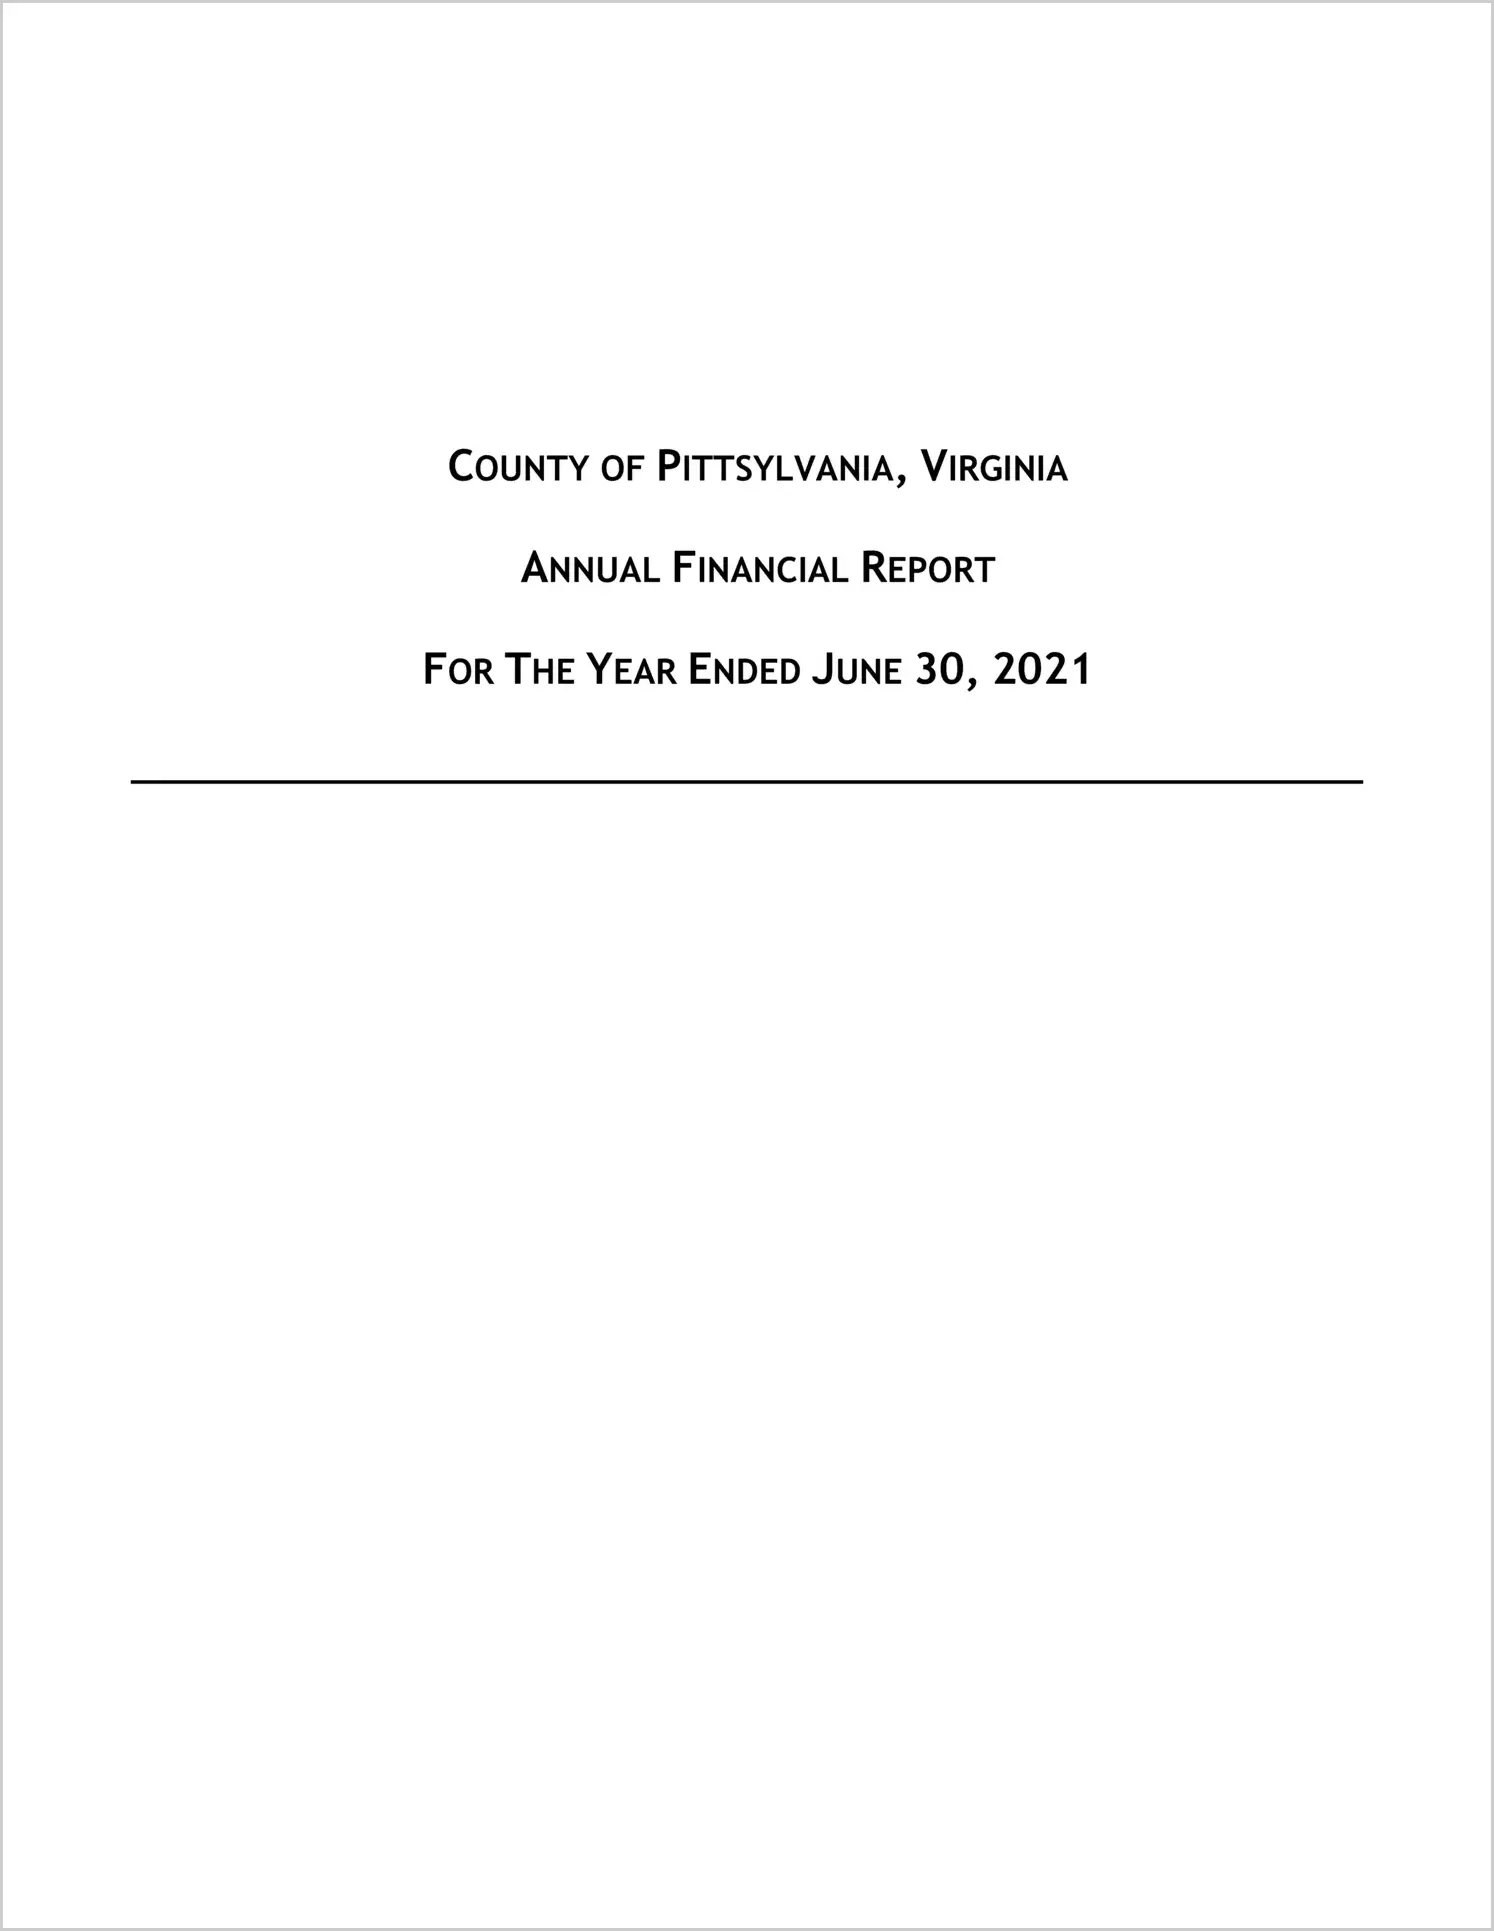 2021 Annual Financial Report for County of Pittsylvania